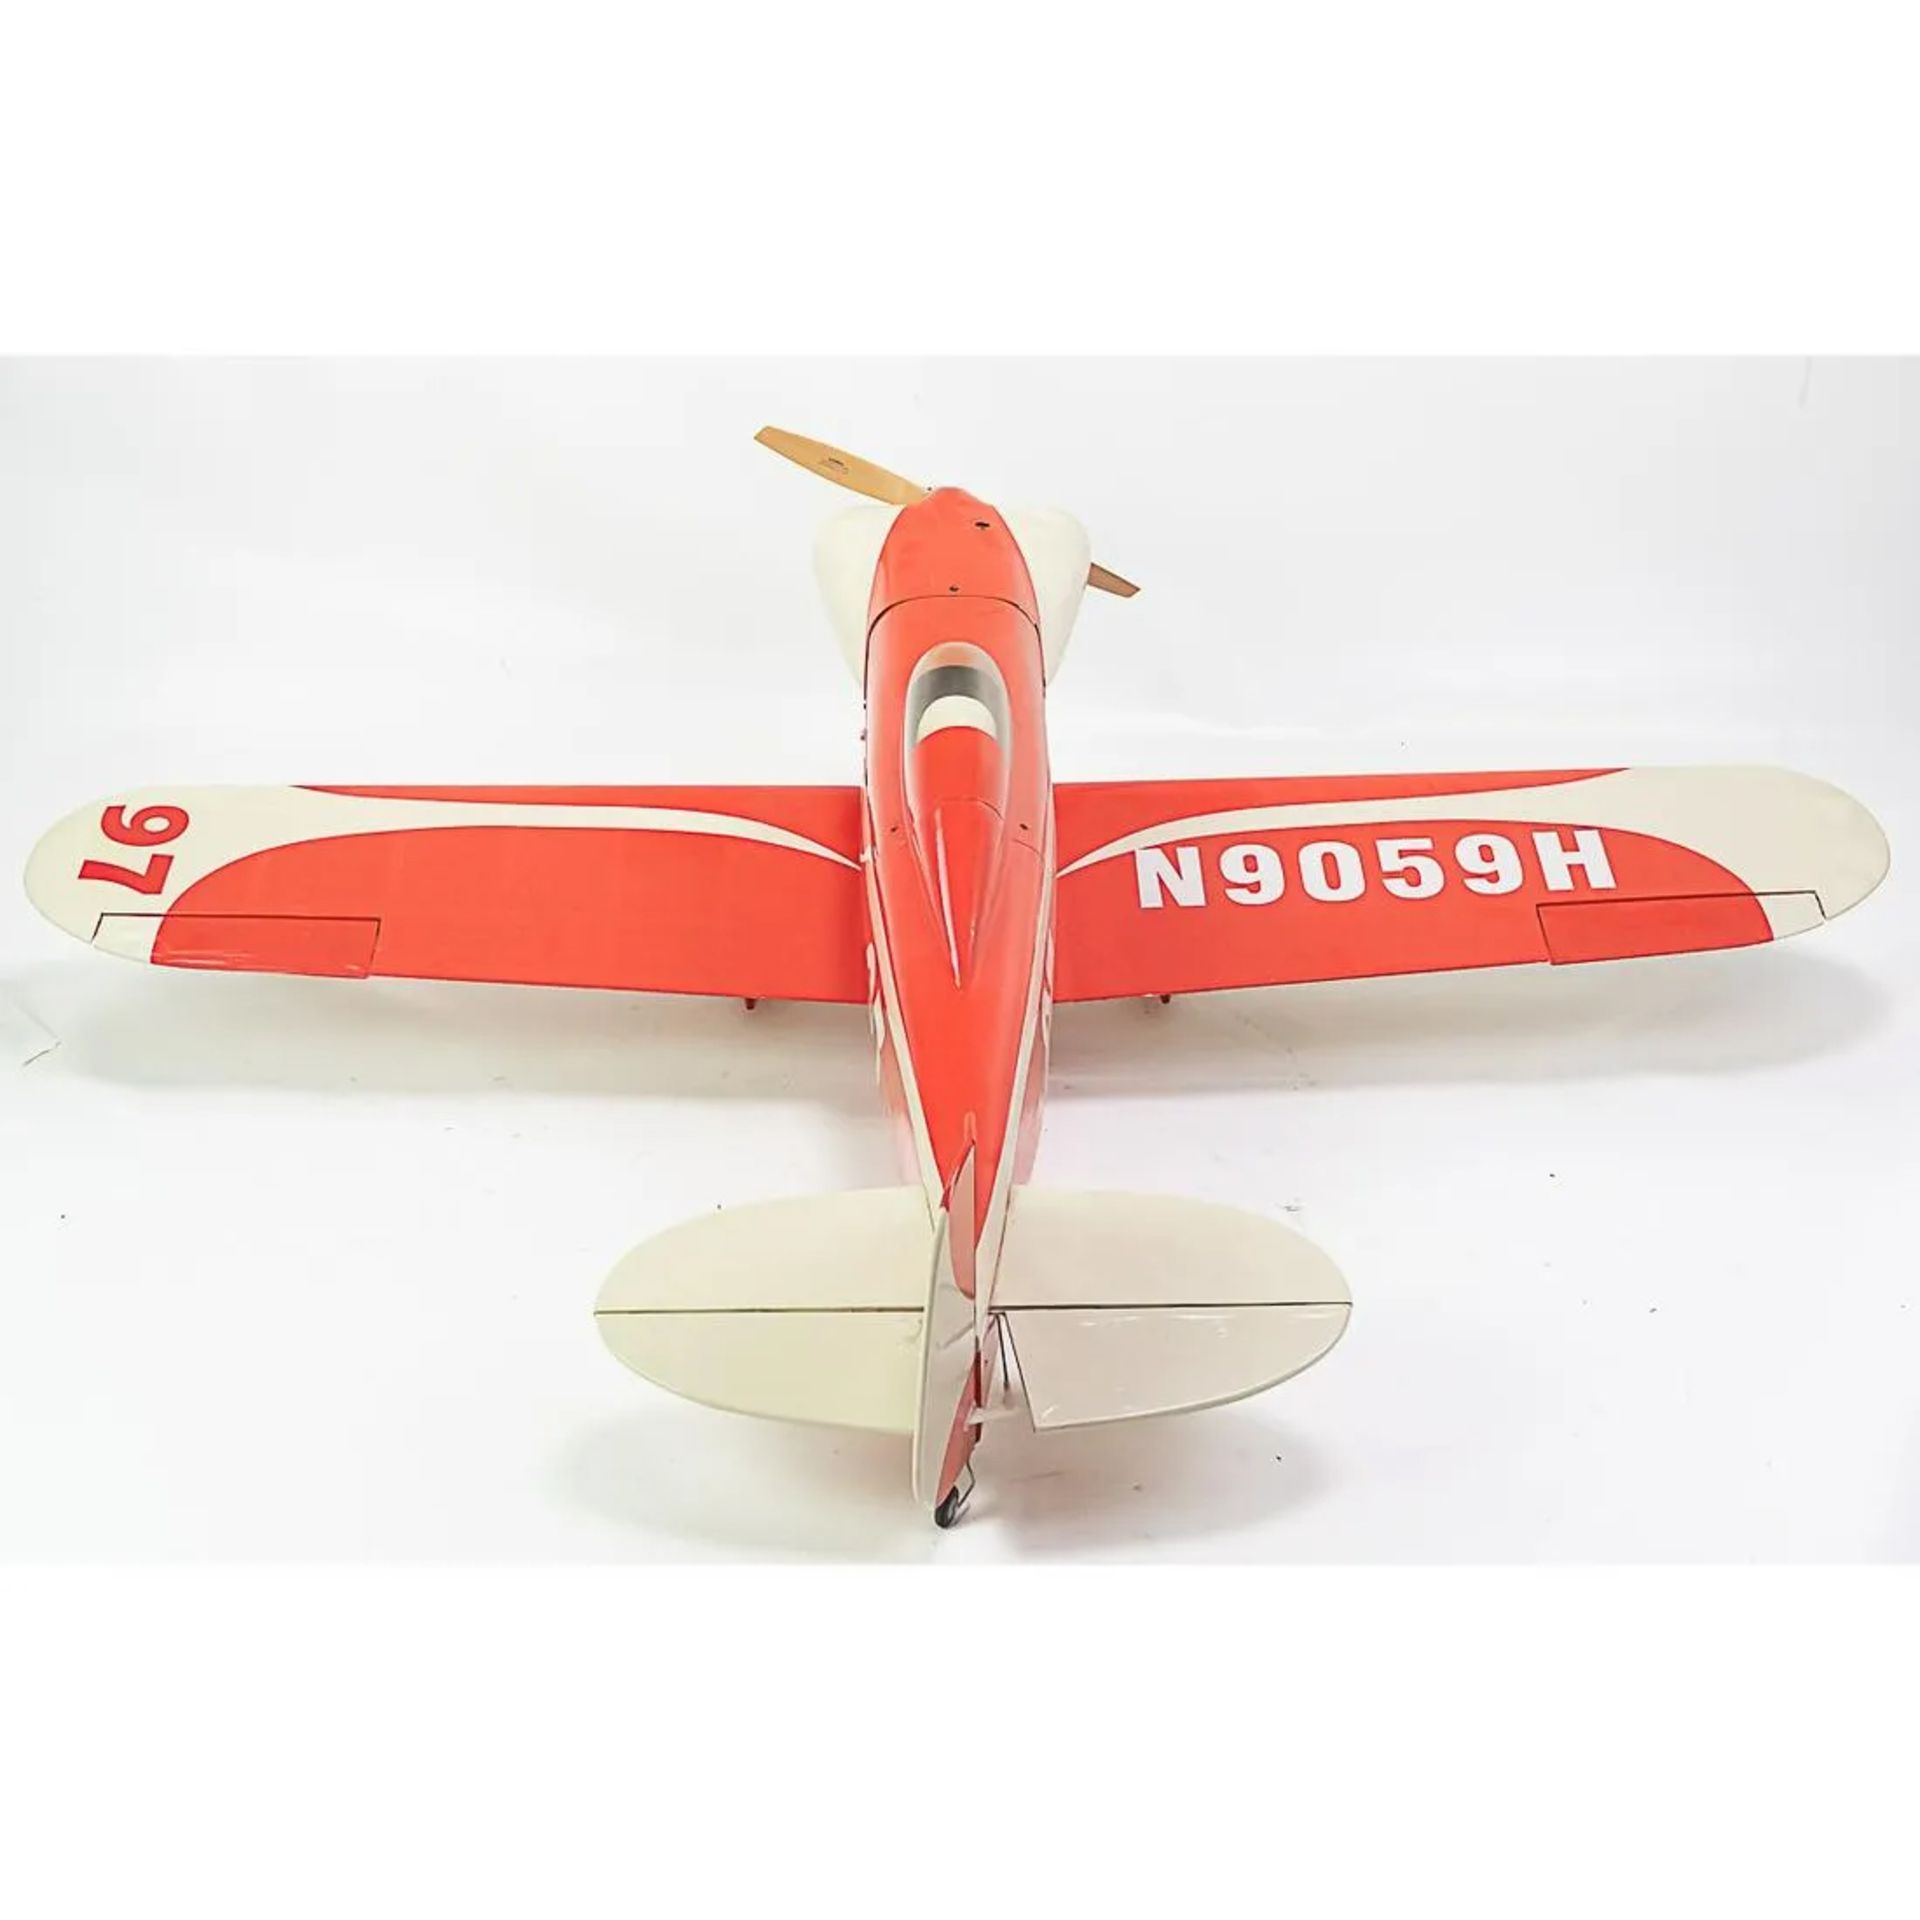 Very Large RC Low Wing Airplane without Motor/Servos - Image 7 of 8